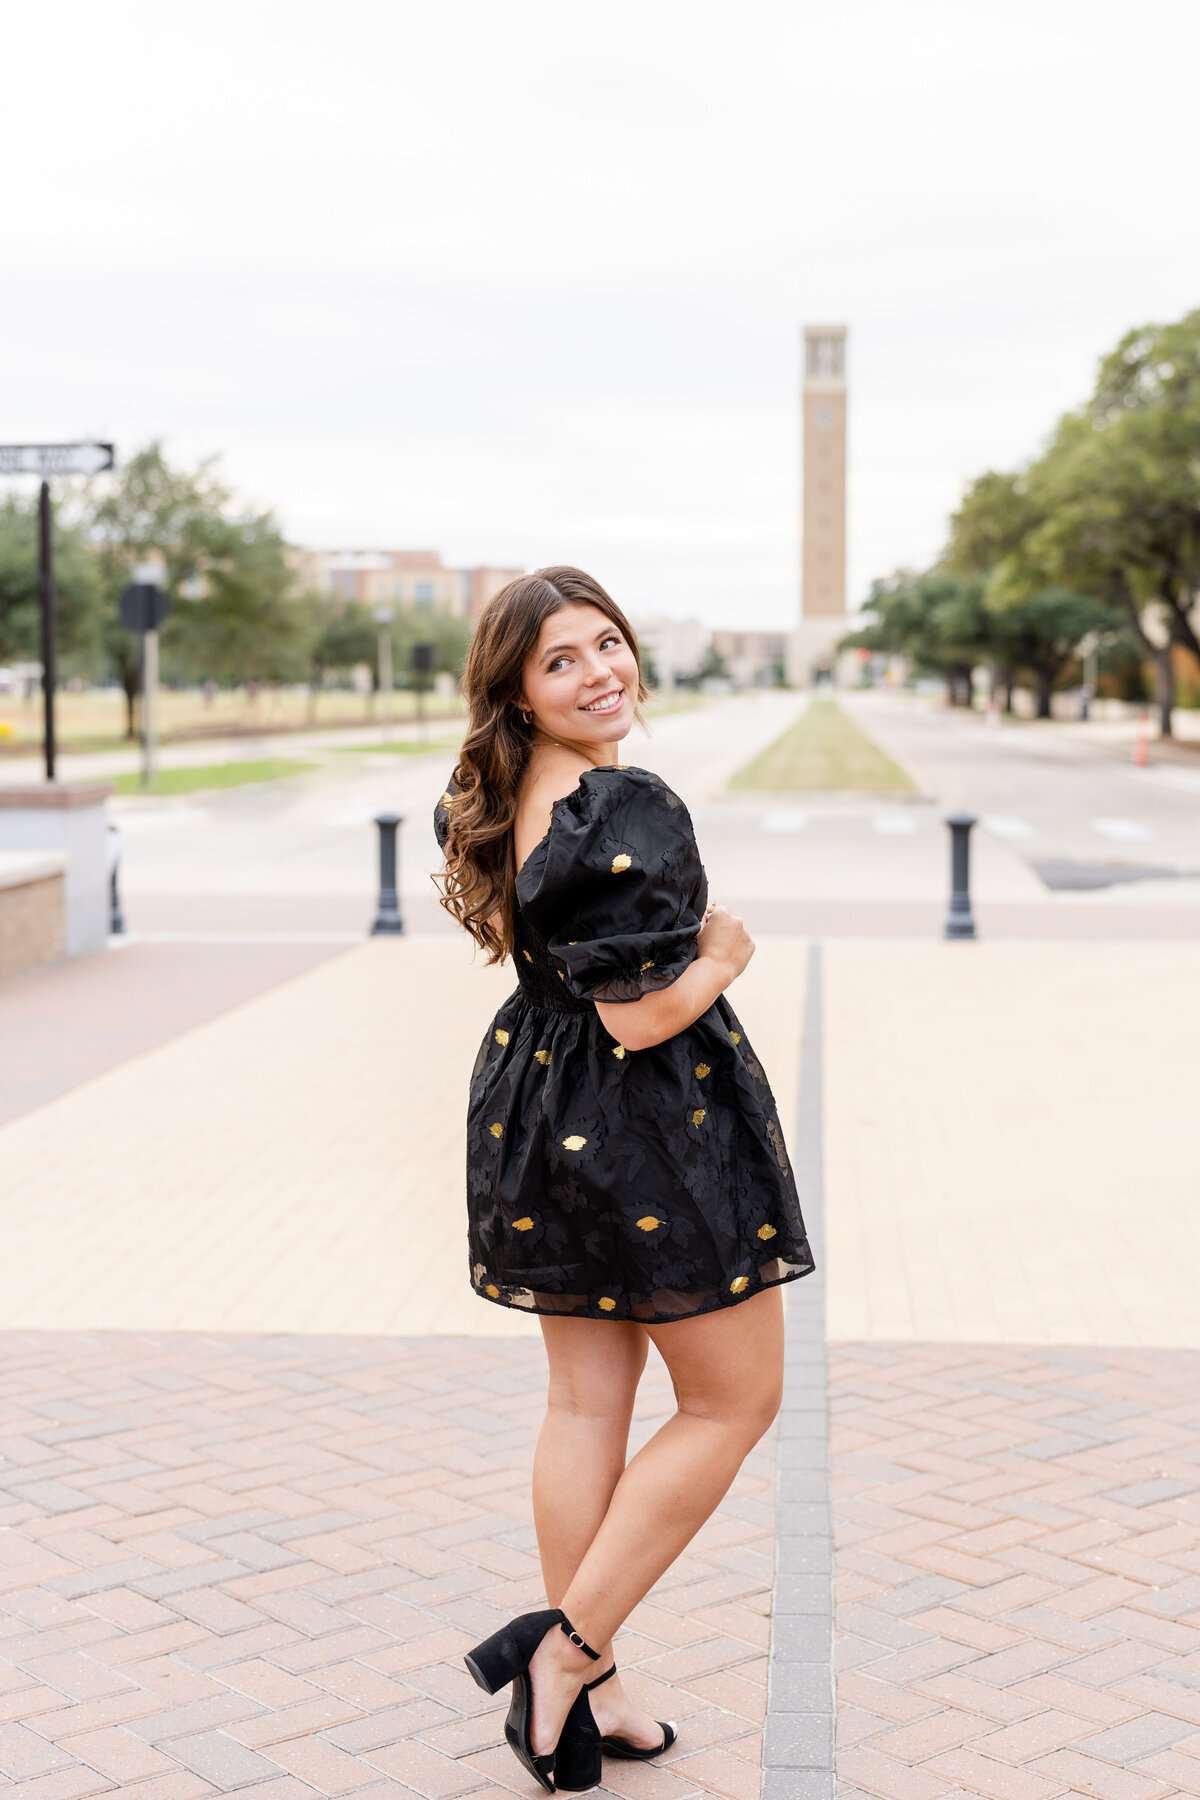 Texas A&M senior girl wearing a black dress and looking over shoulder smiling with Bell Tower in the background